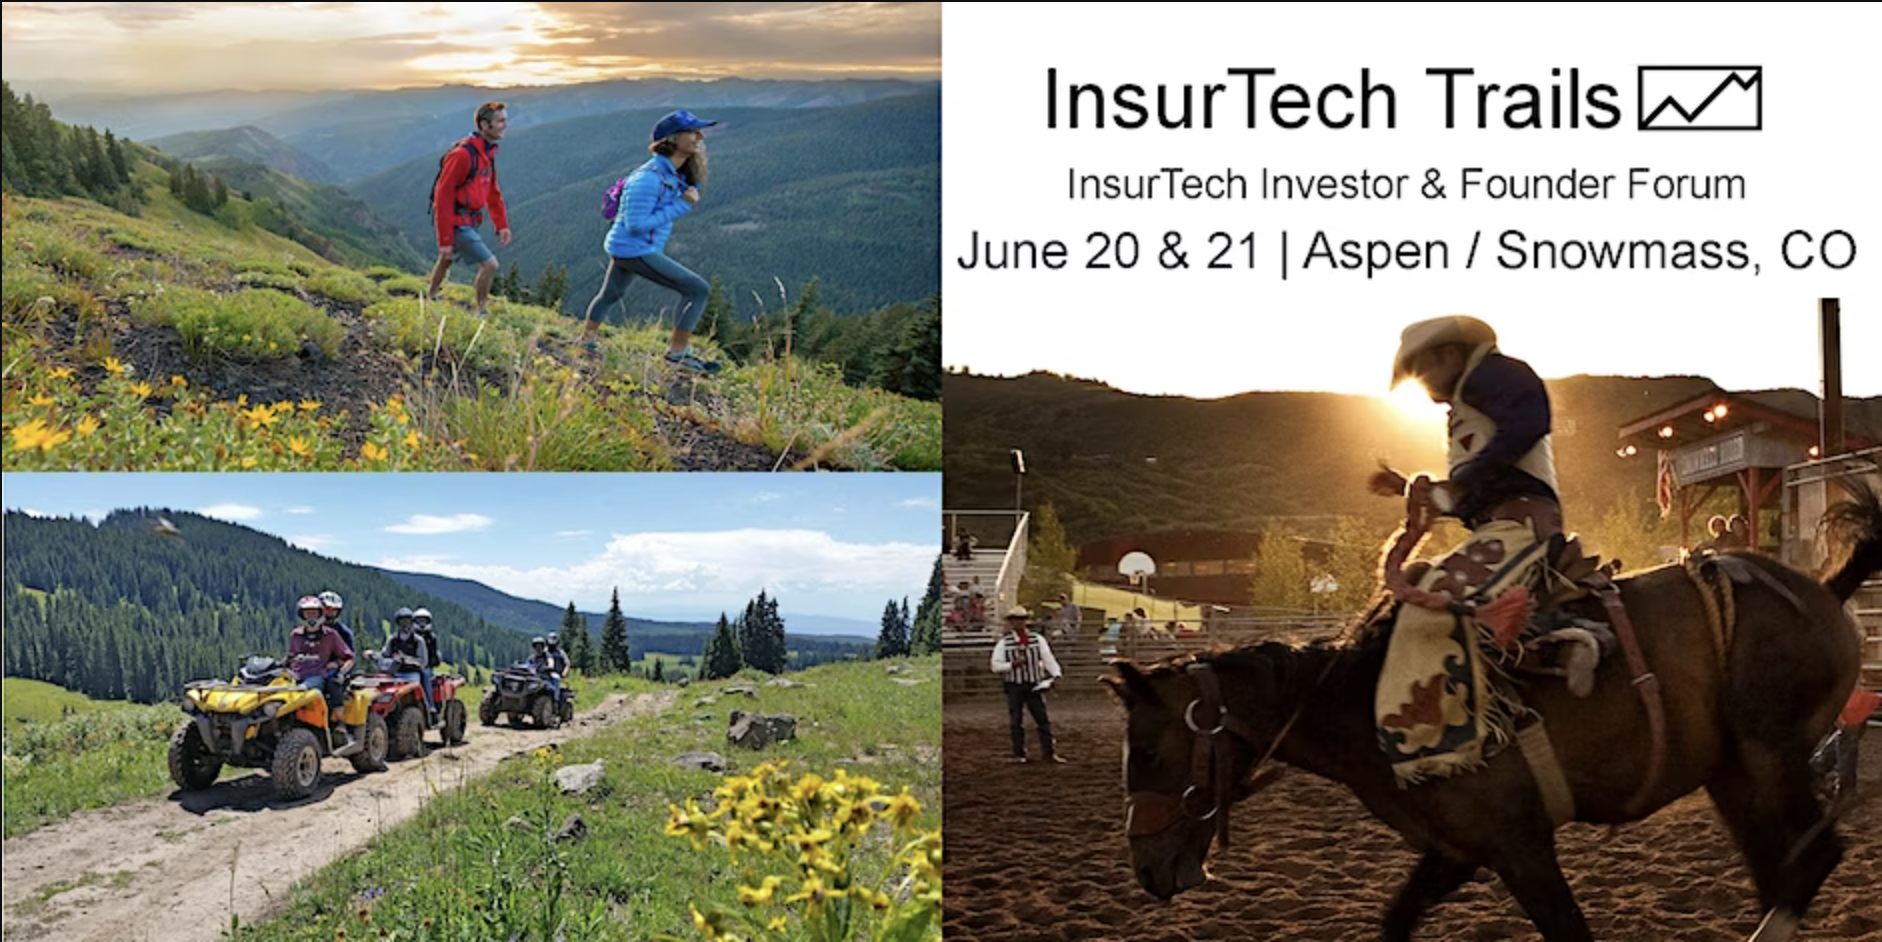 InsurTech Investors and Founders meet at InsurTech Trails 2023